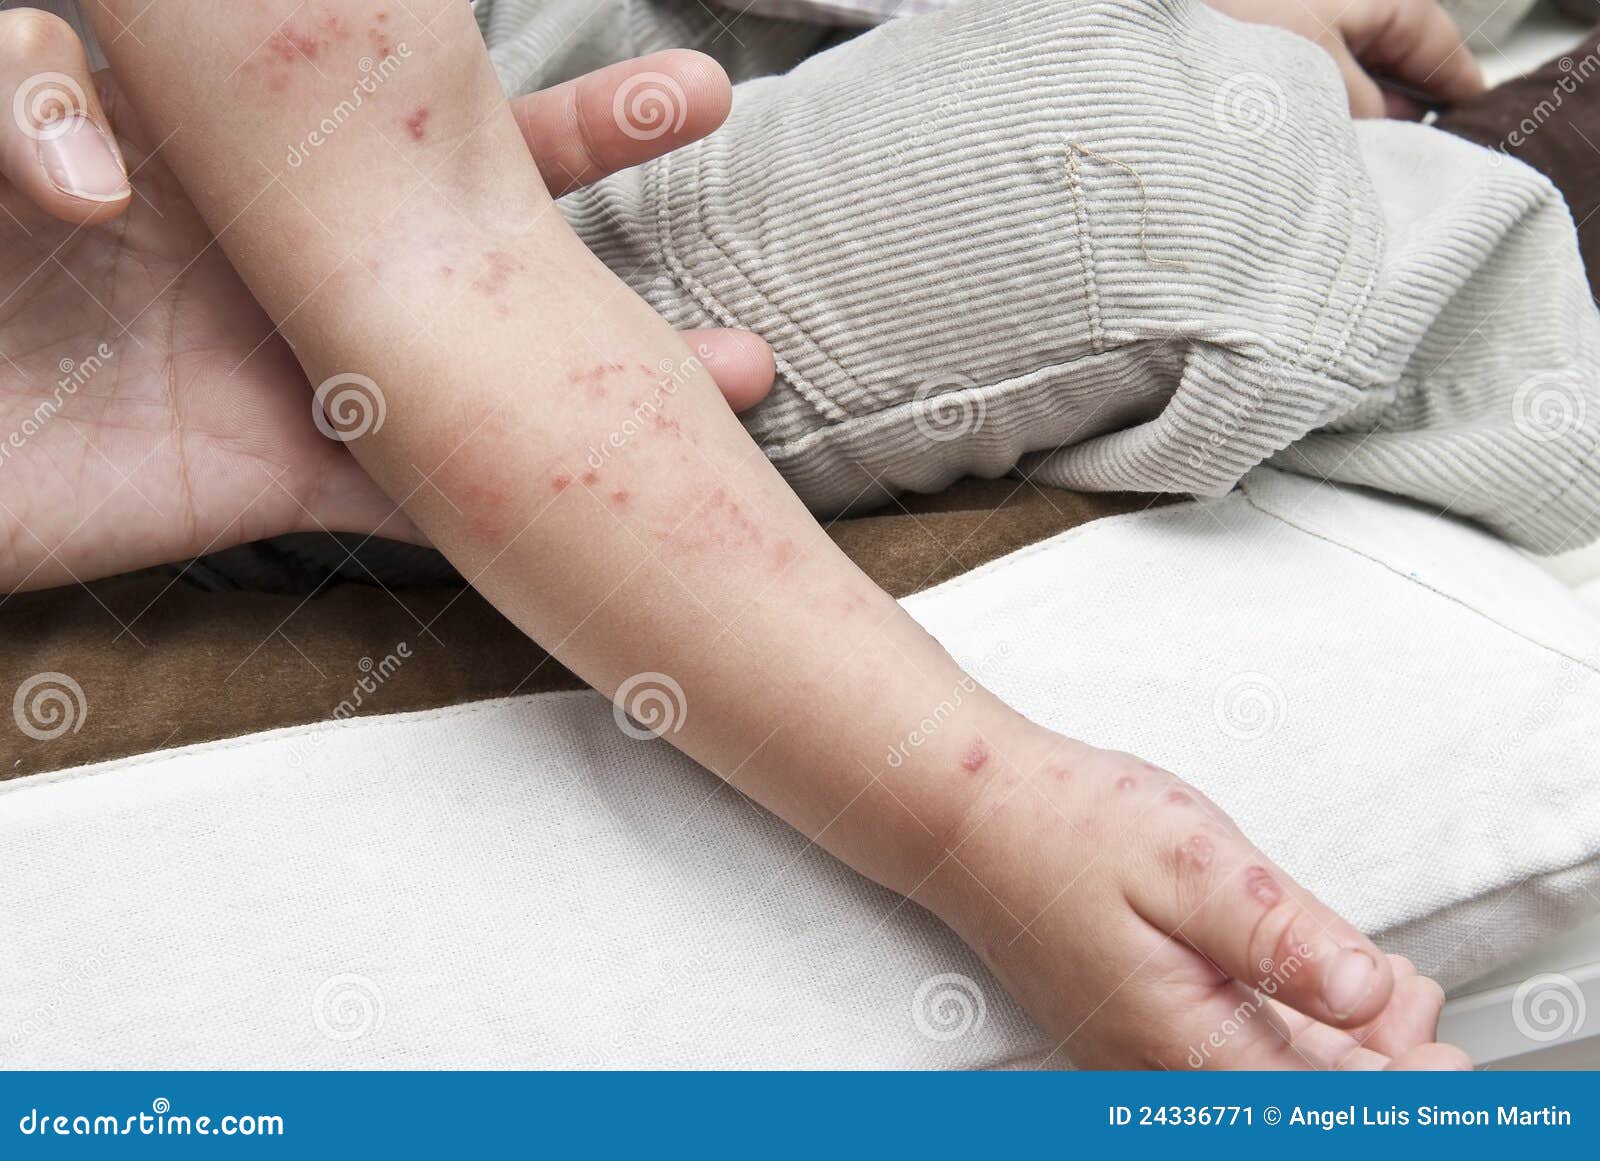 herpes in a child arm.